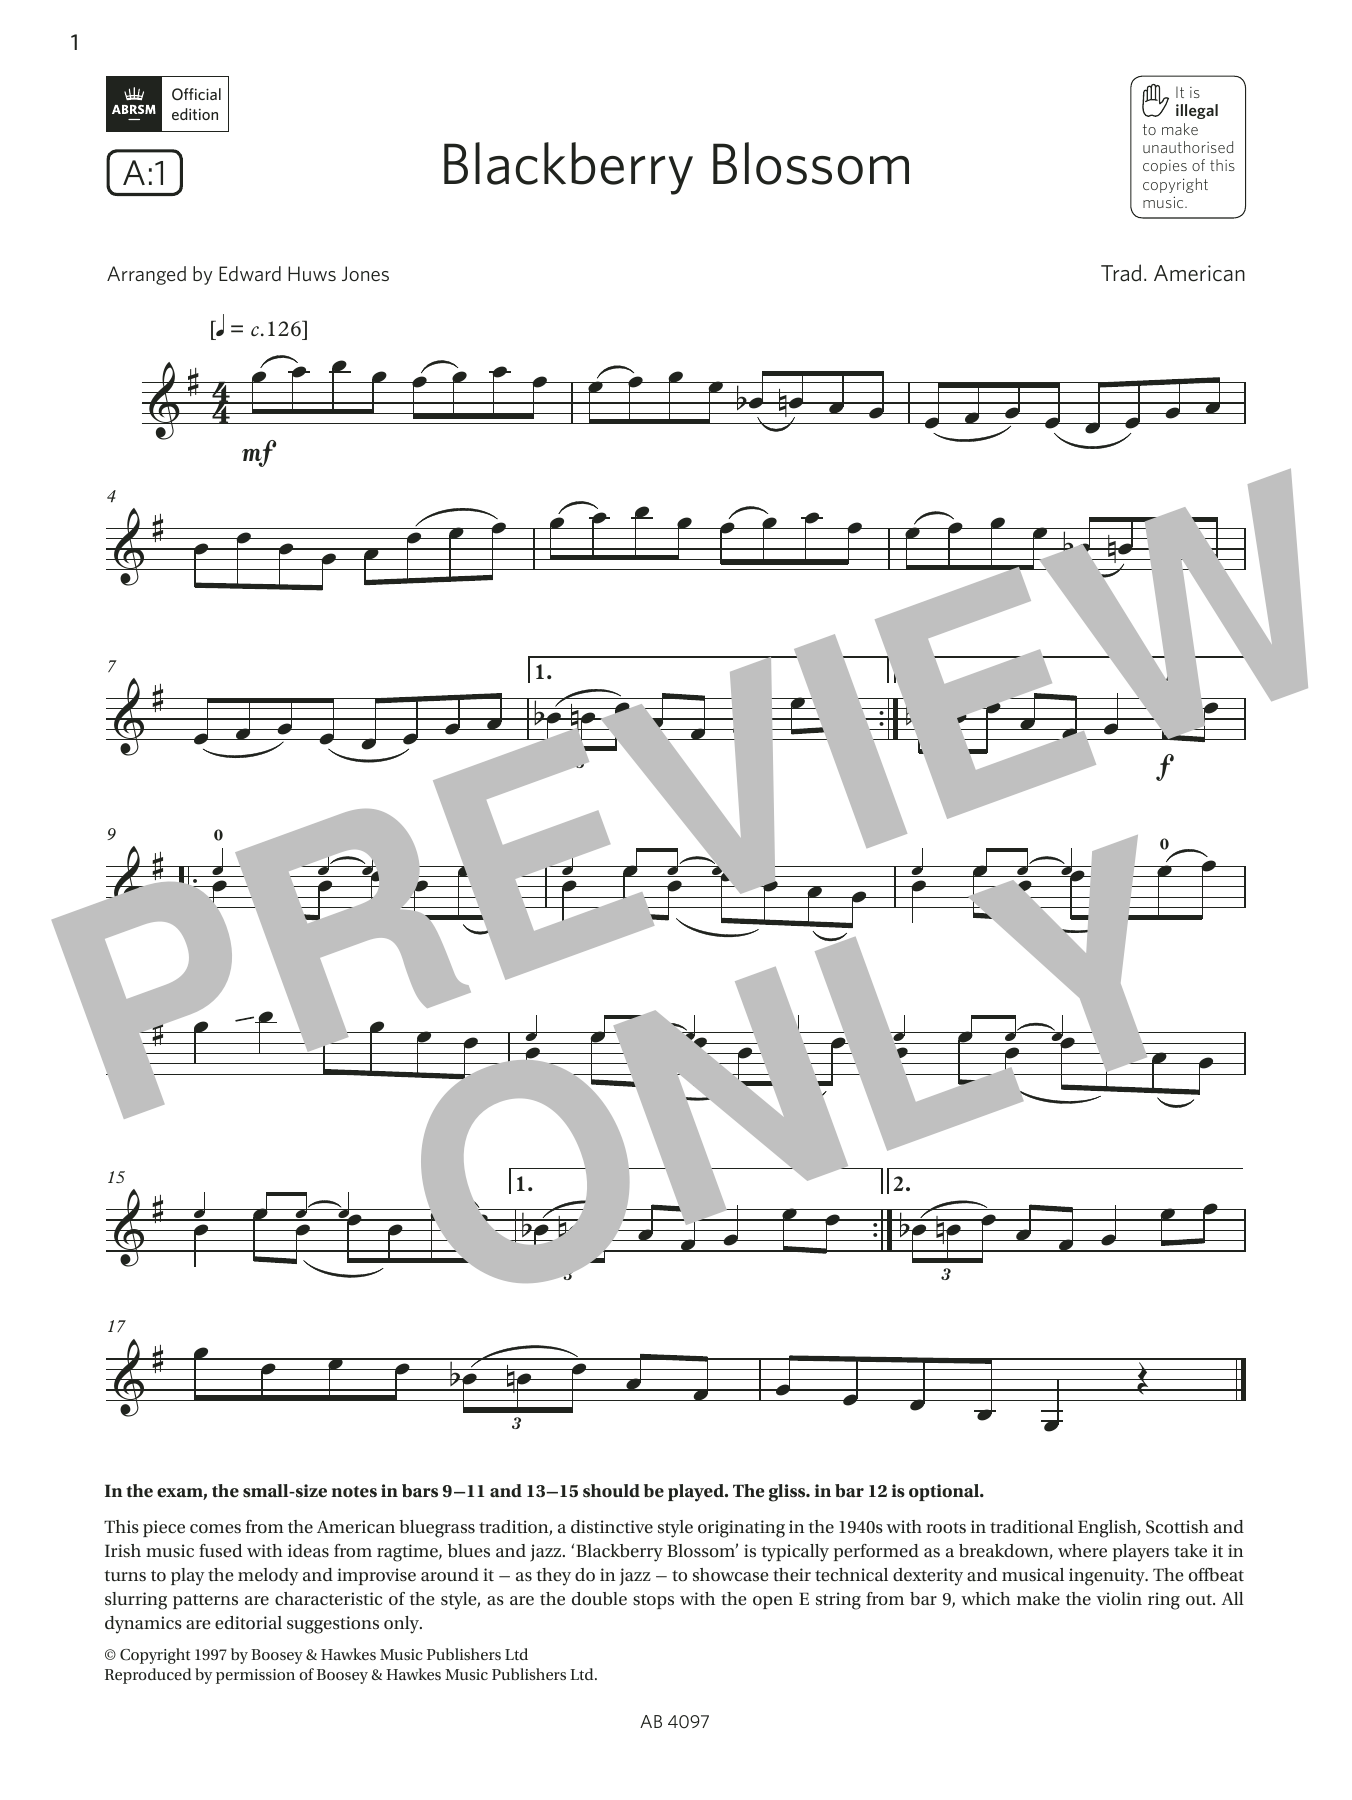 Download Trad. American Blackberry Blossom (Grade 3, A1, from t Sheet Music